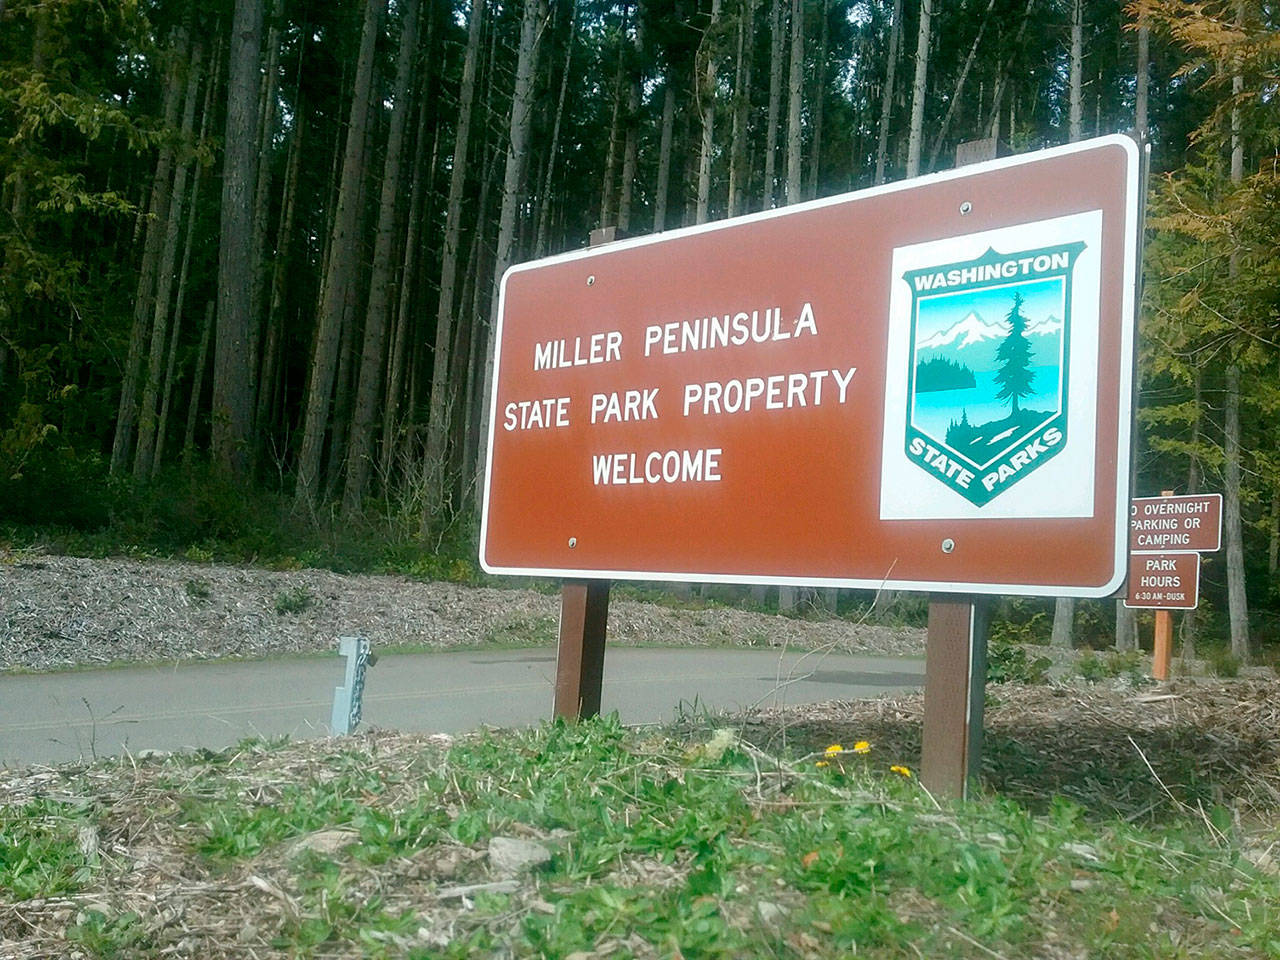 A proposal to create a destination park on Miller Peninsula has been backed by Clallam County. (Michael Dashiell/Olympic Peninsula News Group)